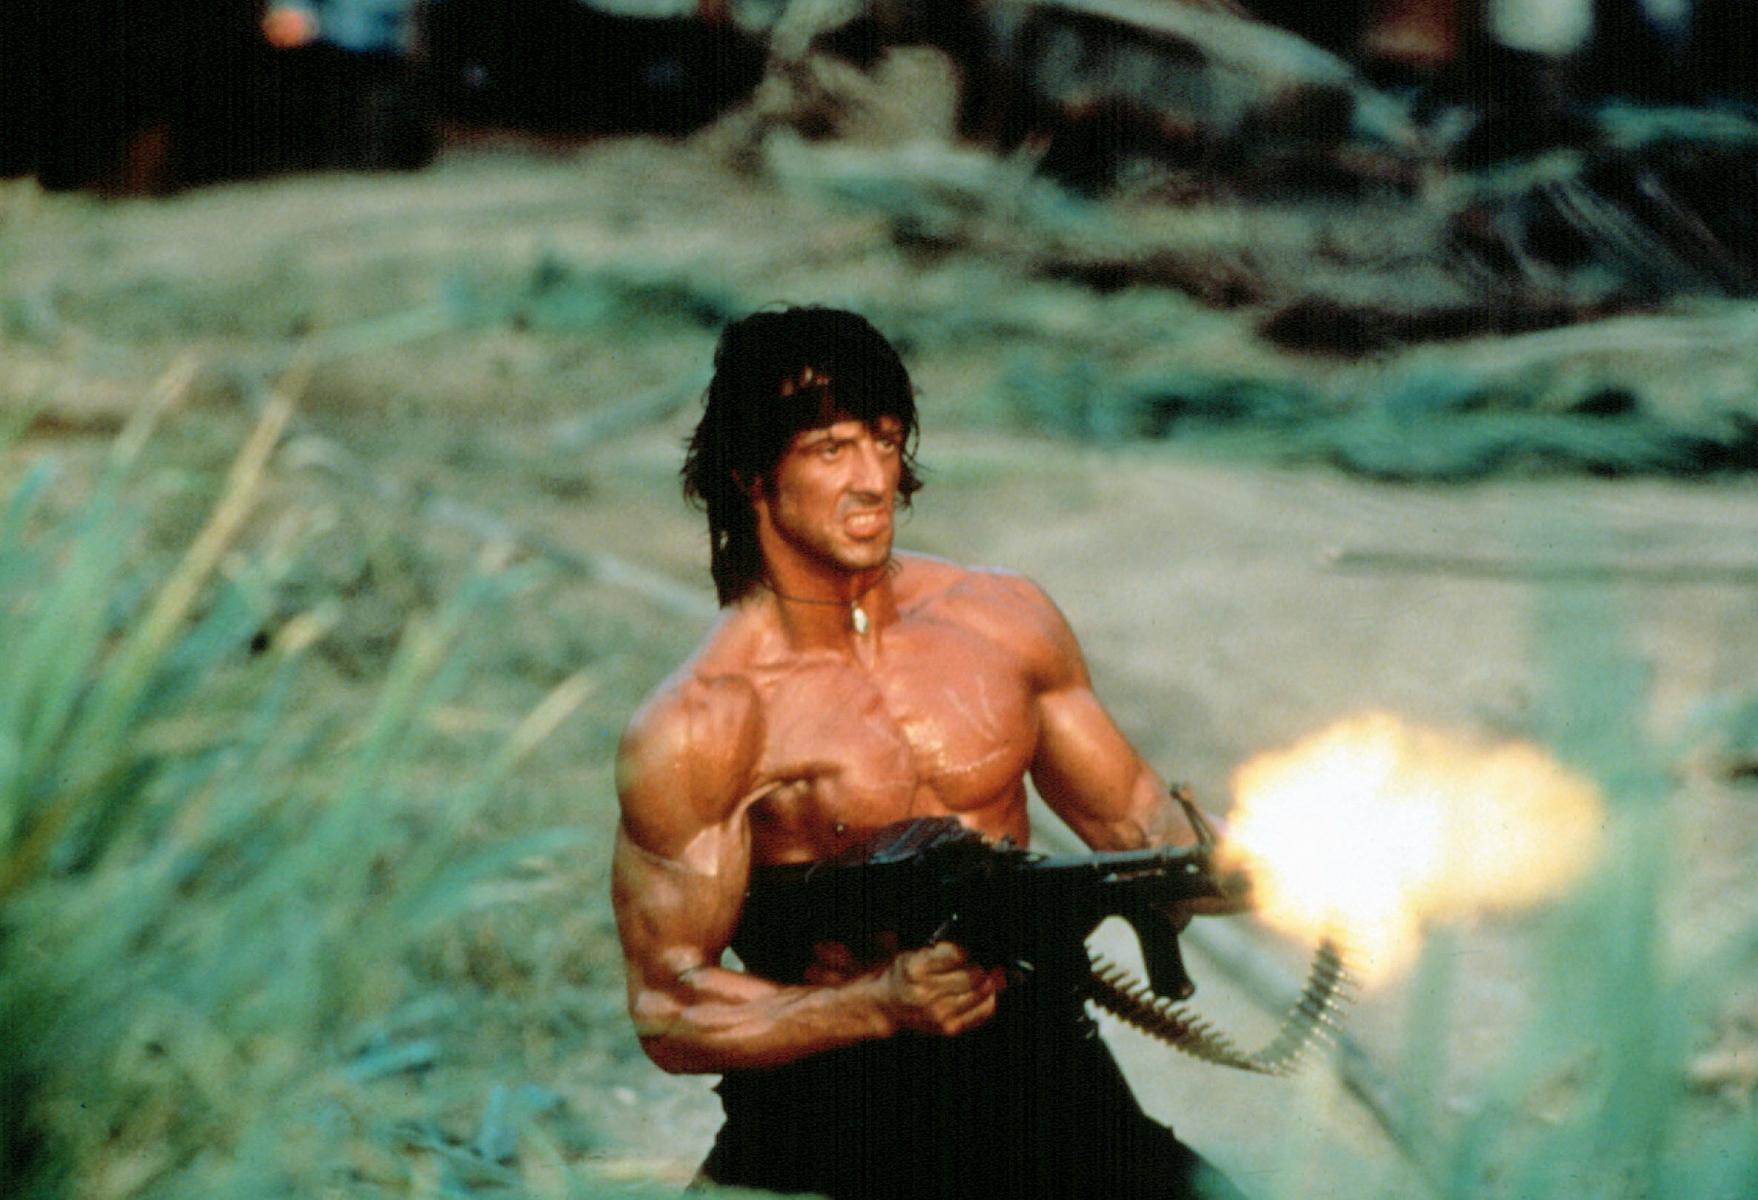 1 person died in the first Rambo movie, and it was accidental.